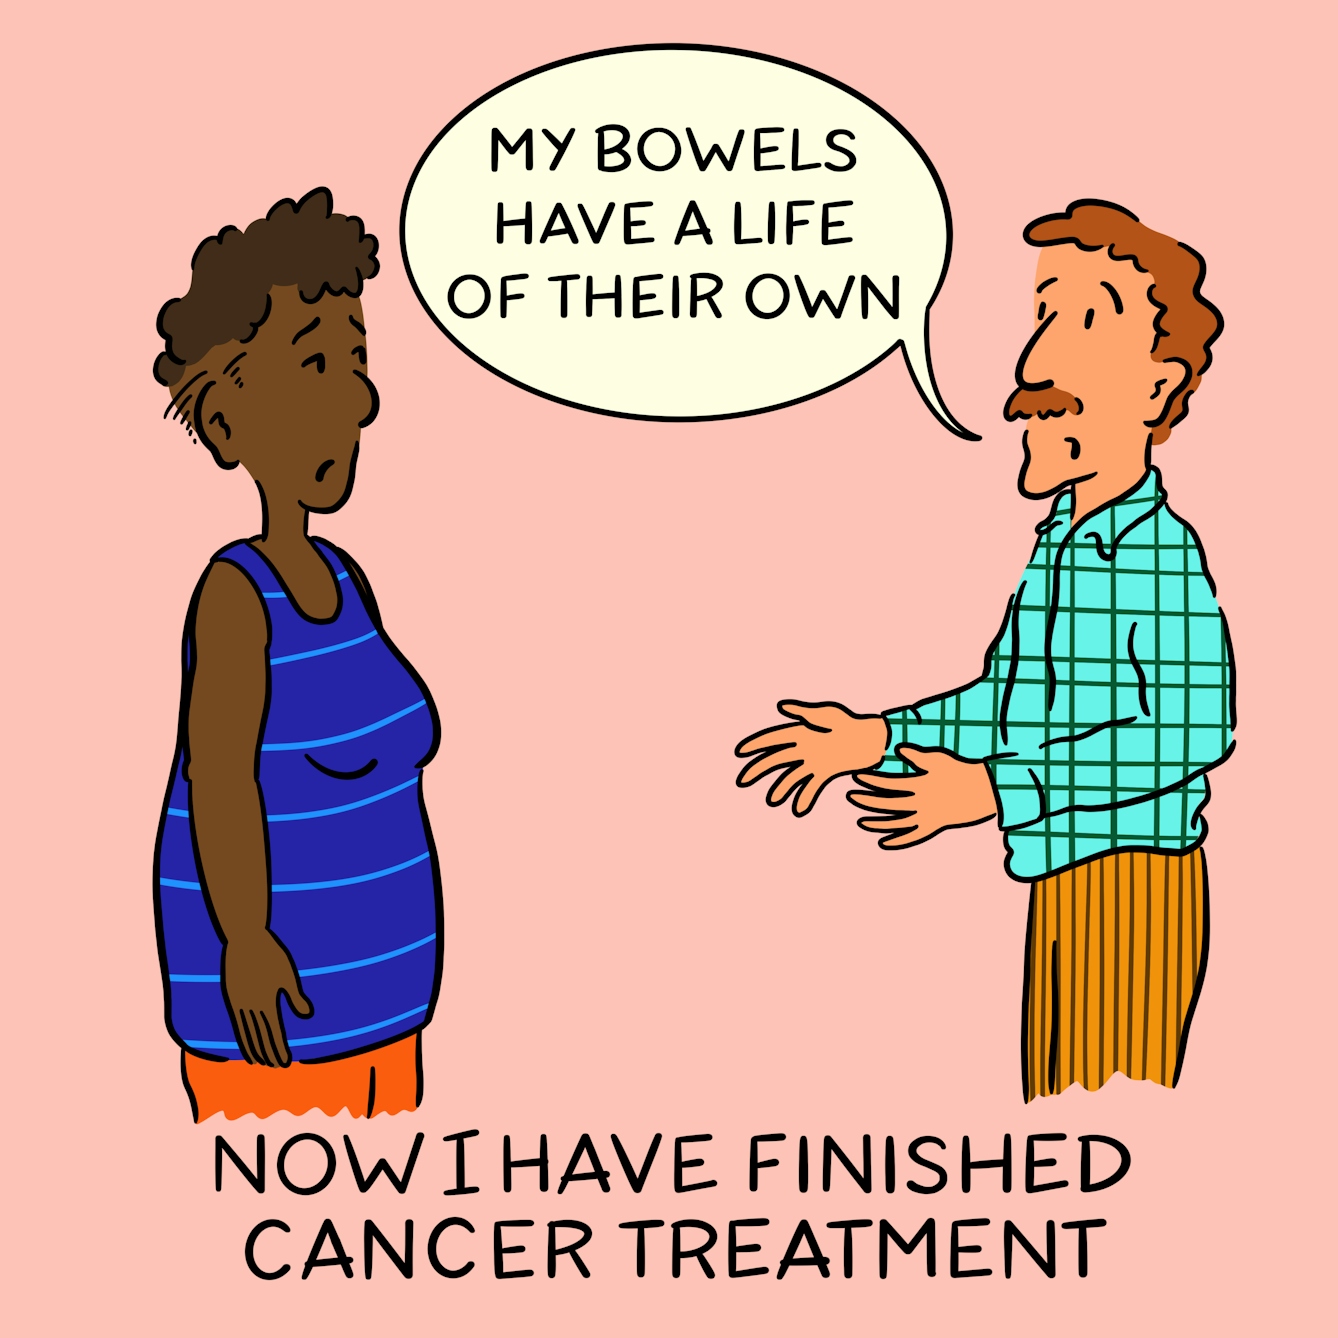 Panel 1 of a four-panel comic drawn digitally: a white man with a moustache in a plaid shirt says to a bemused black woman with an undercut "My bowels have a life of their own". The caption text reads "Now I have finished cancer treatment"